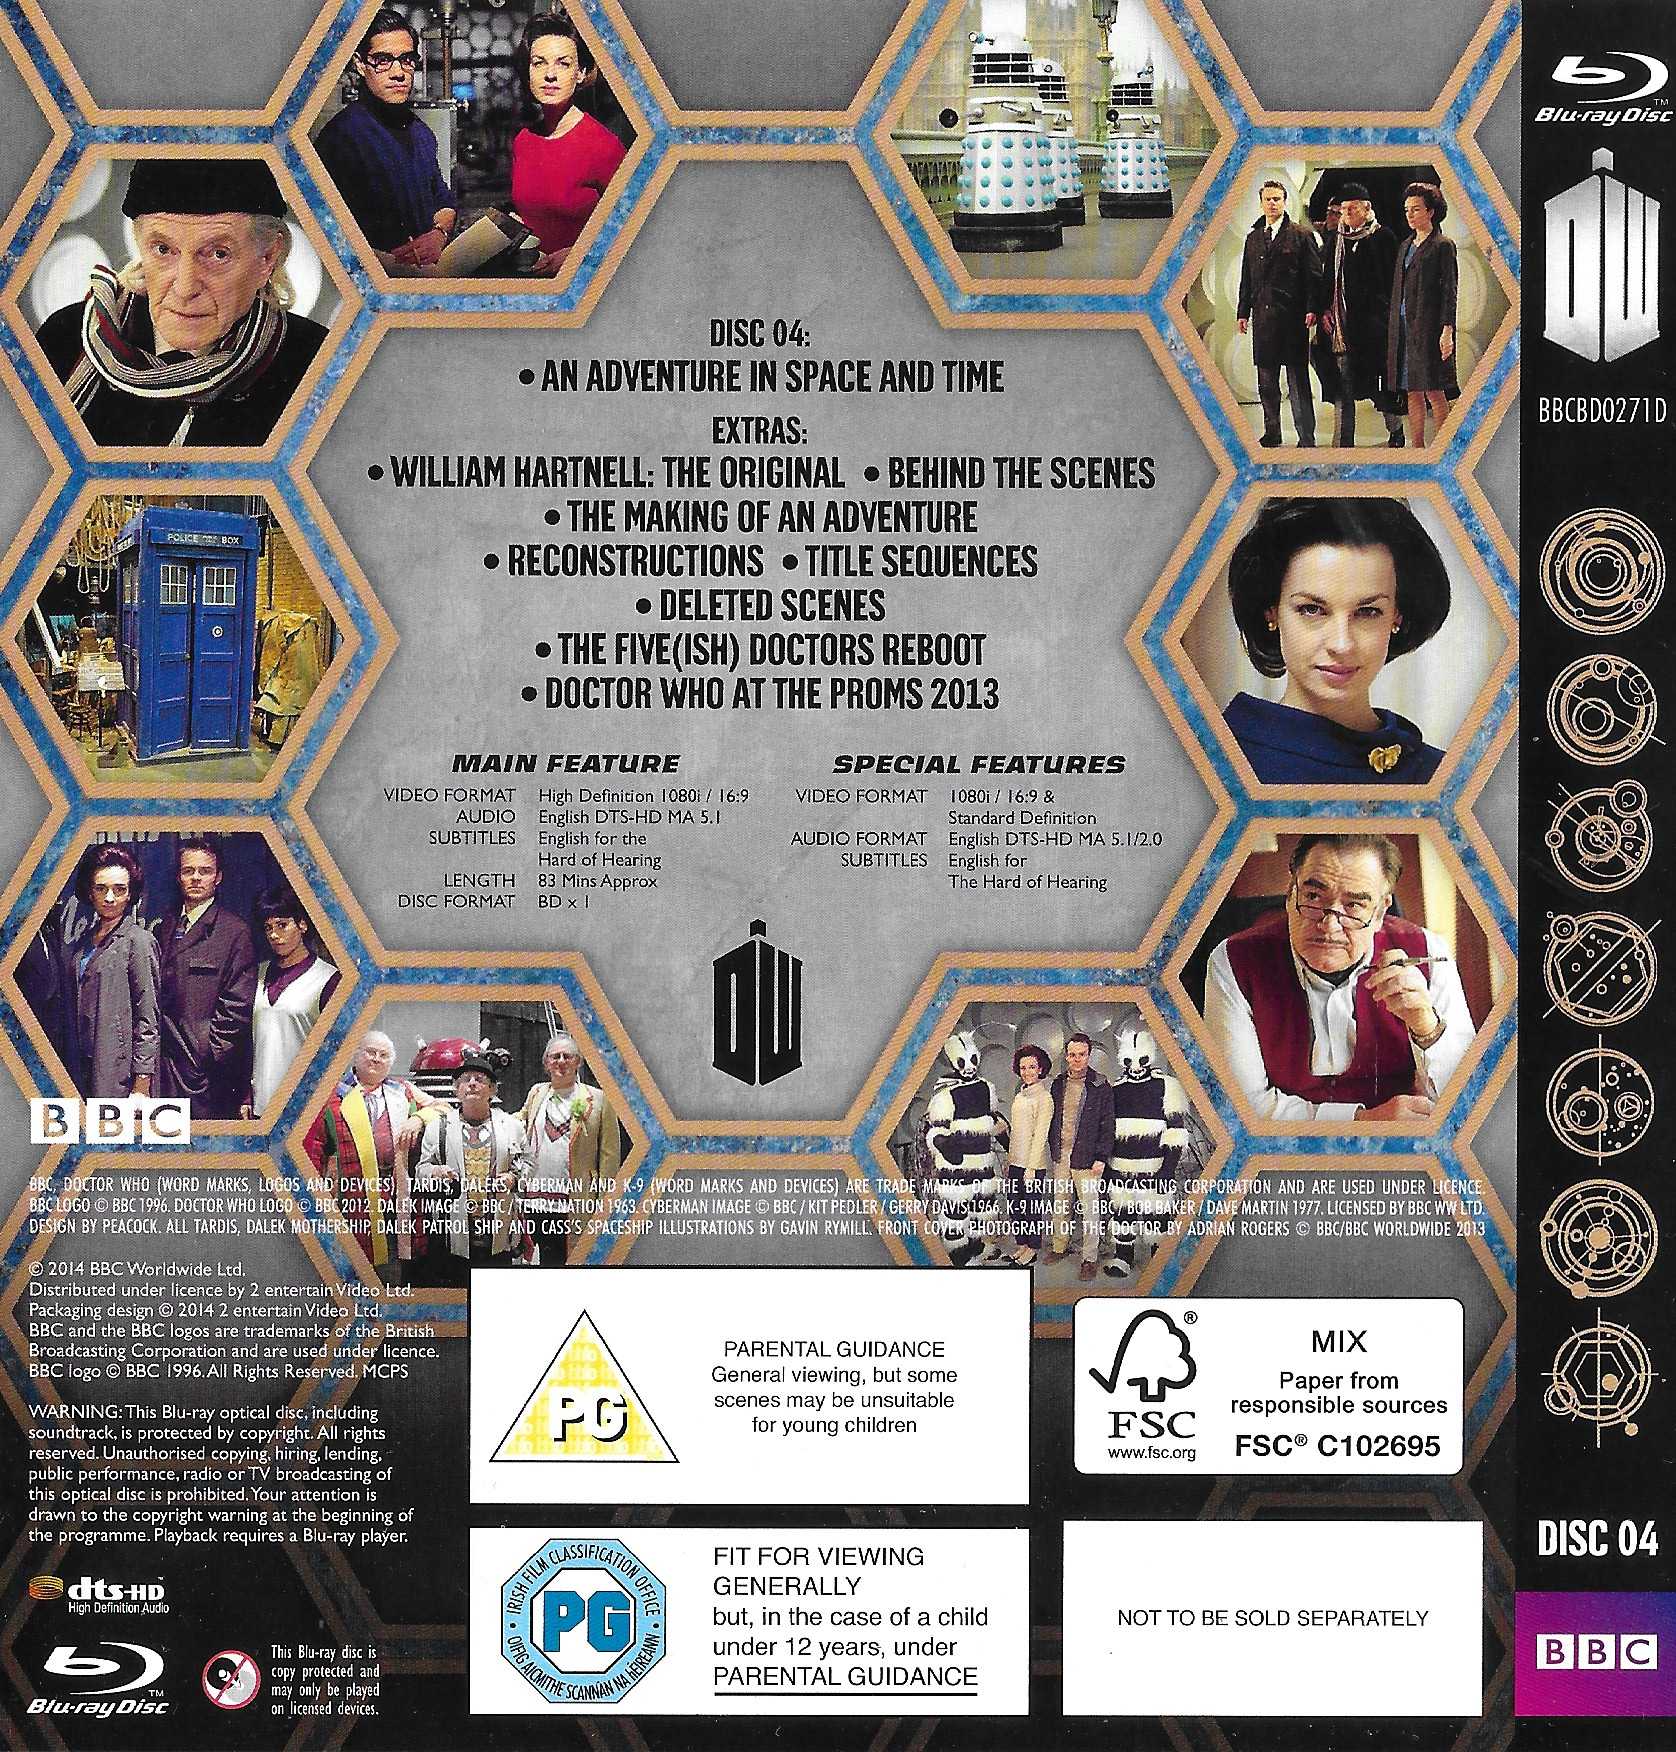 Picture of BBCBD 0271 04 Doctor Who - An adventure in space and time by artist Mark Gatiss from the BBC records and Tapes library